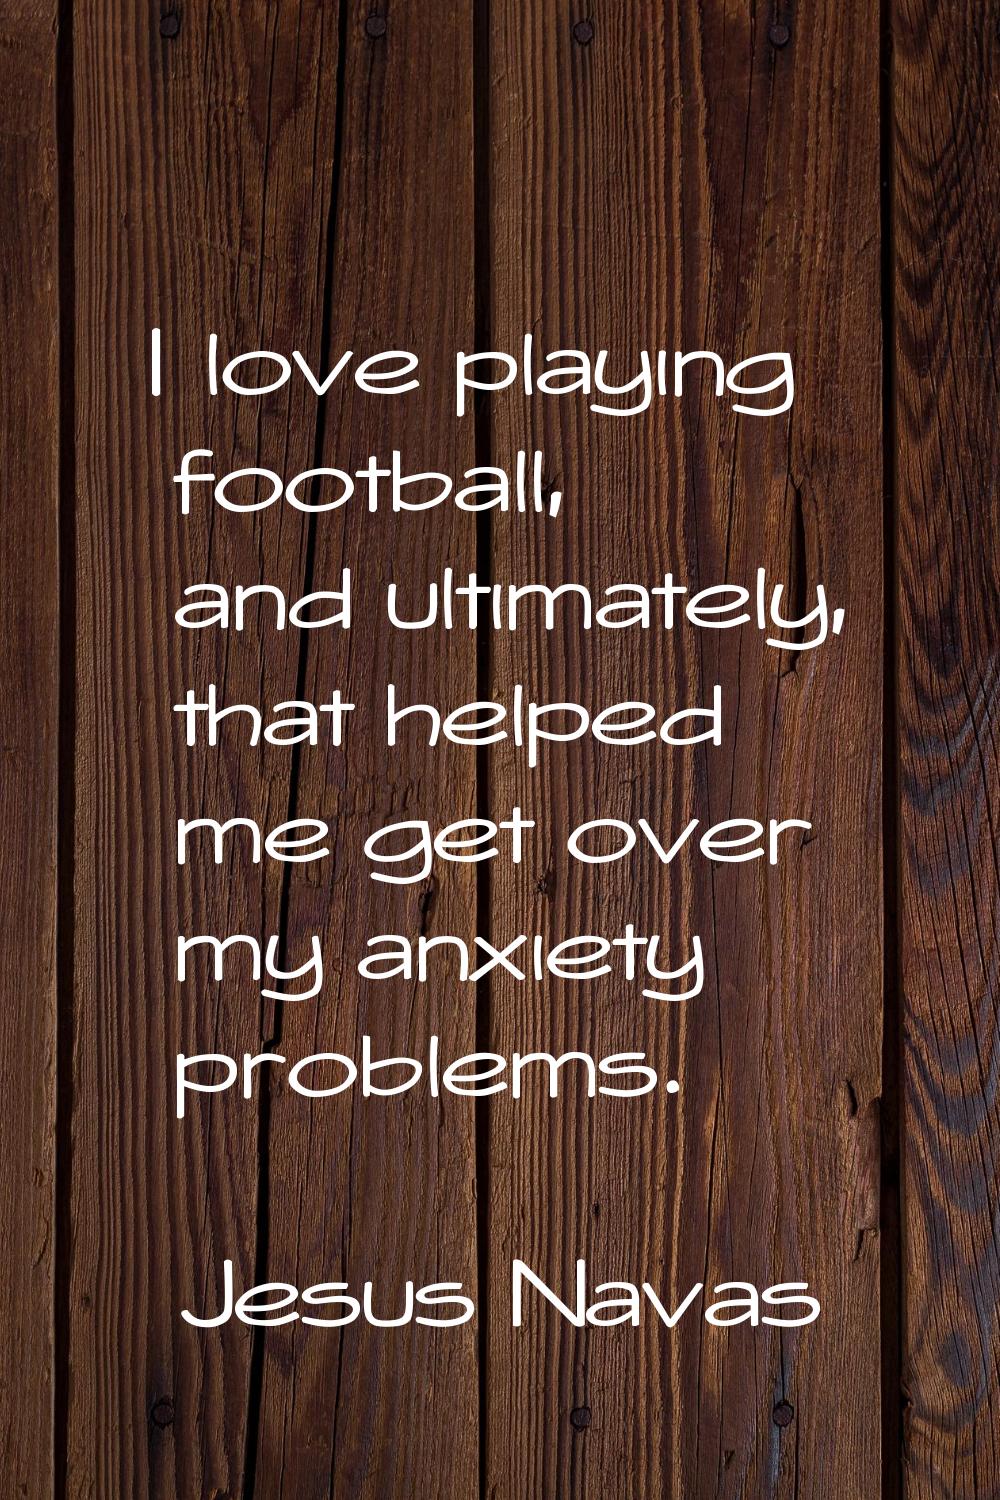 I love playing football, and ultimately, that helped me get over my anxiety problems.